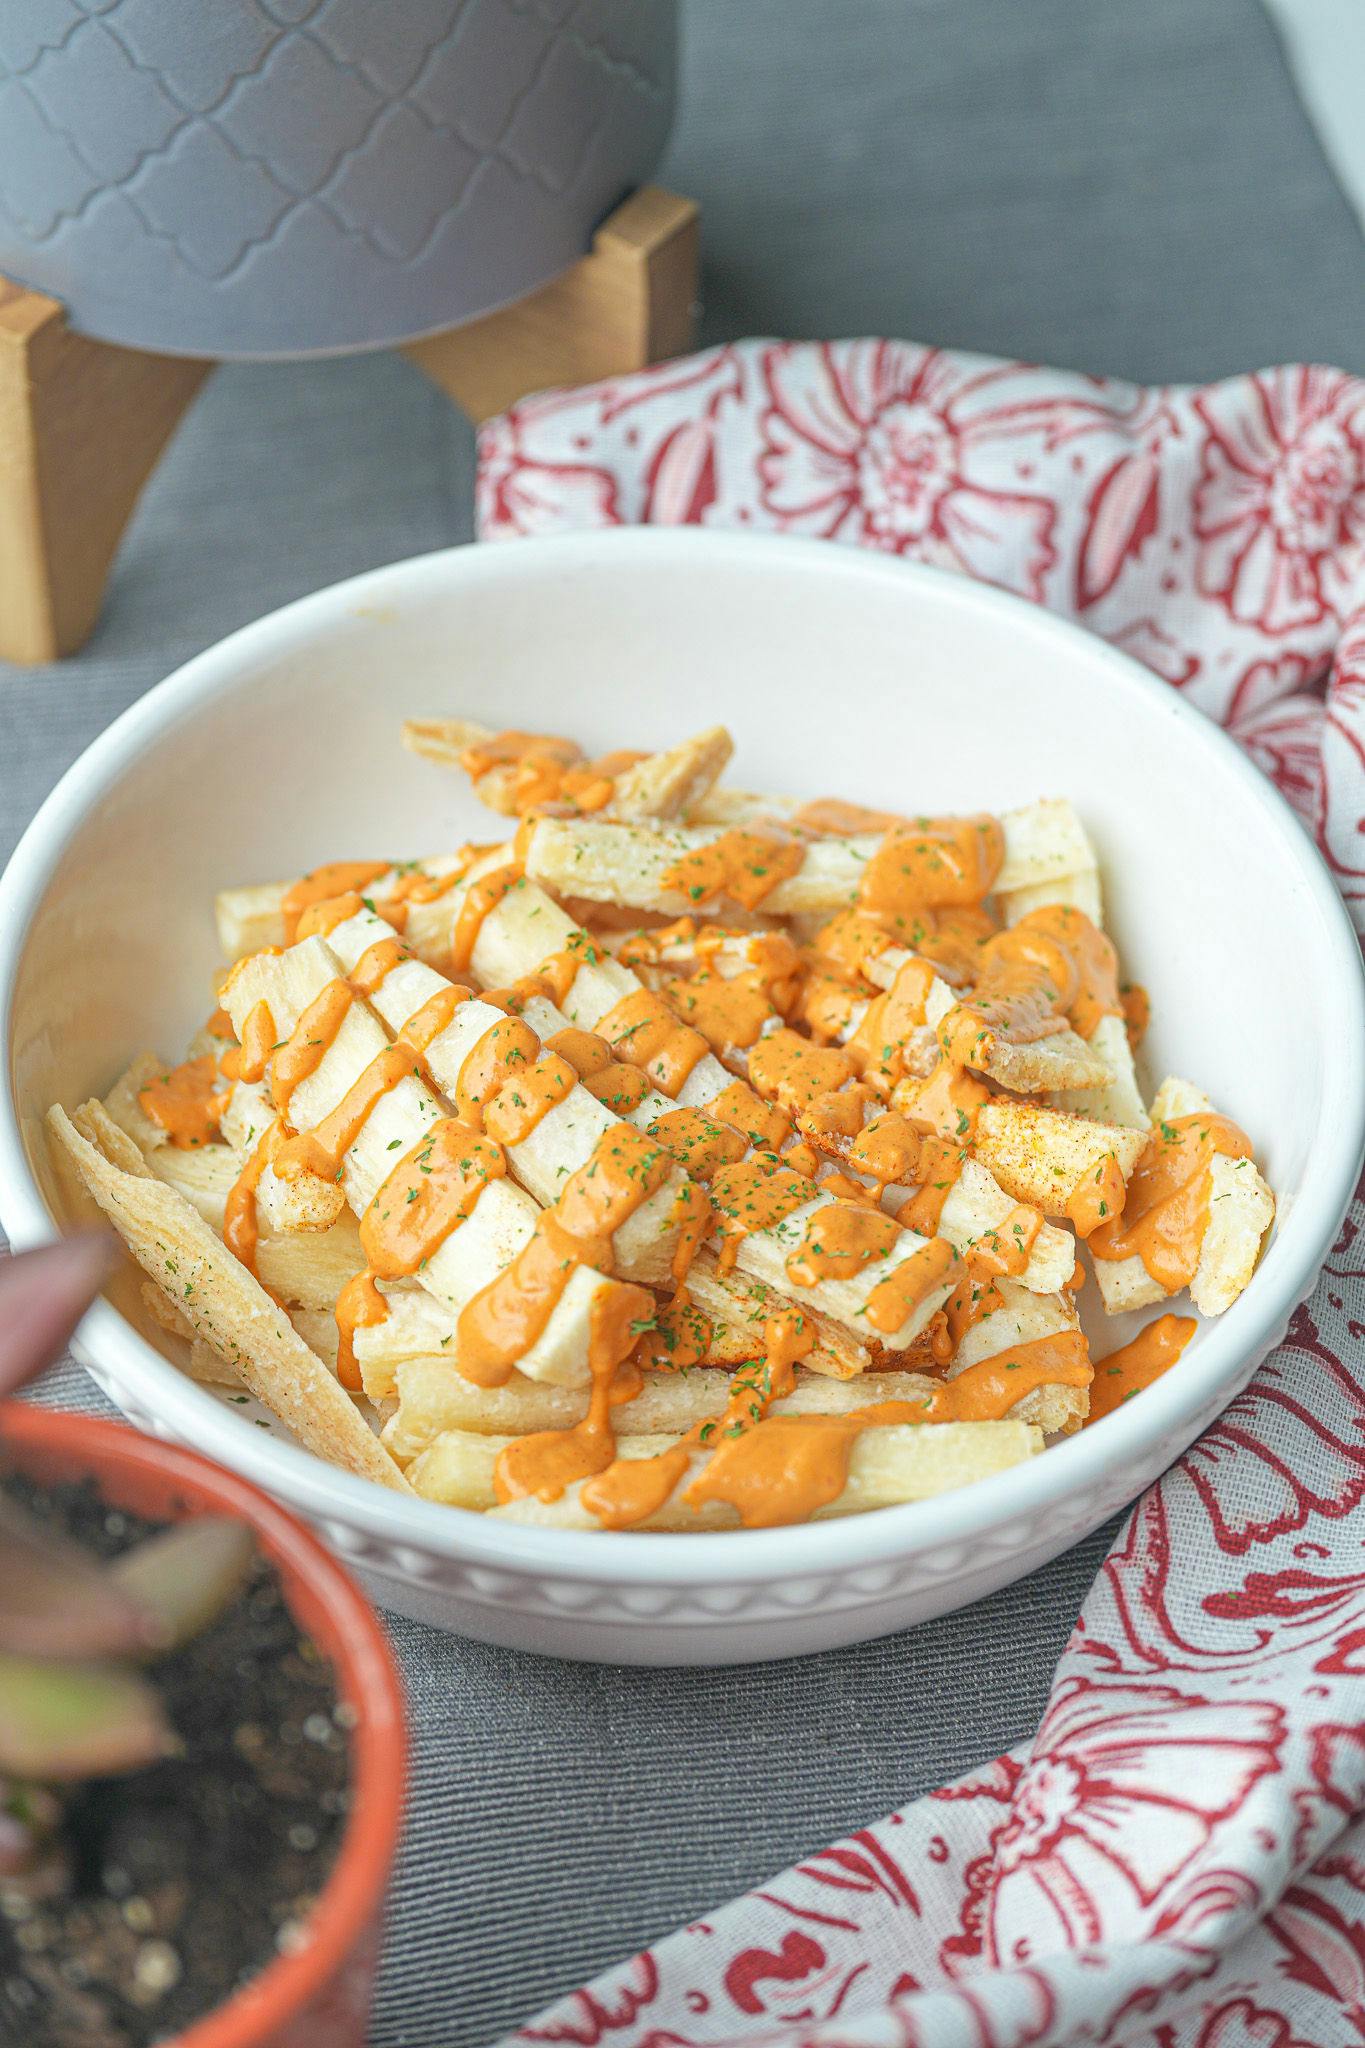 Crunchy Yuca Fries with Chipotle Cashew Sauce